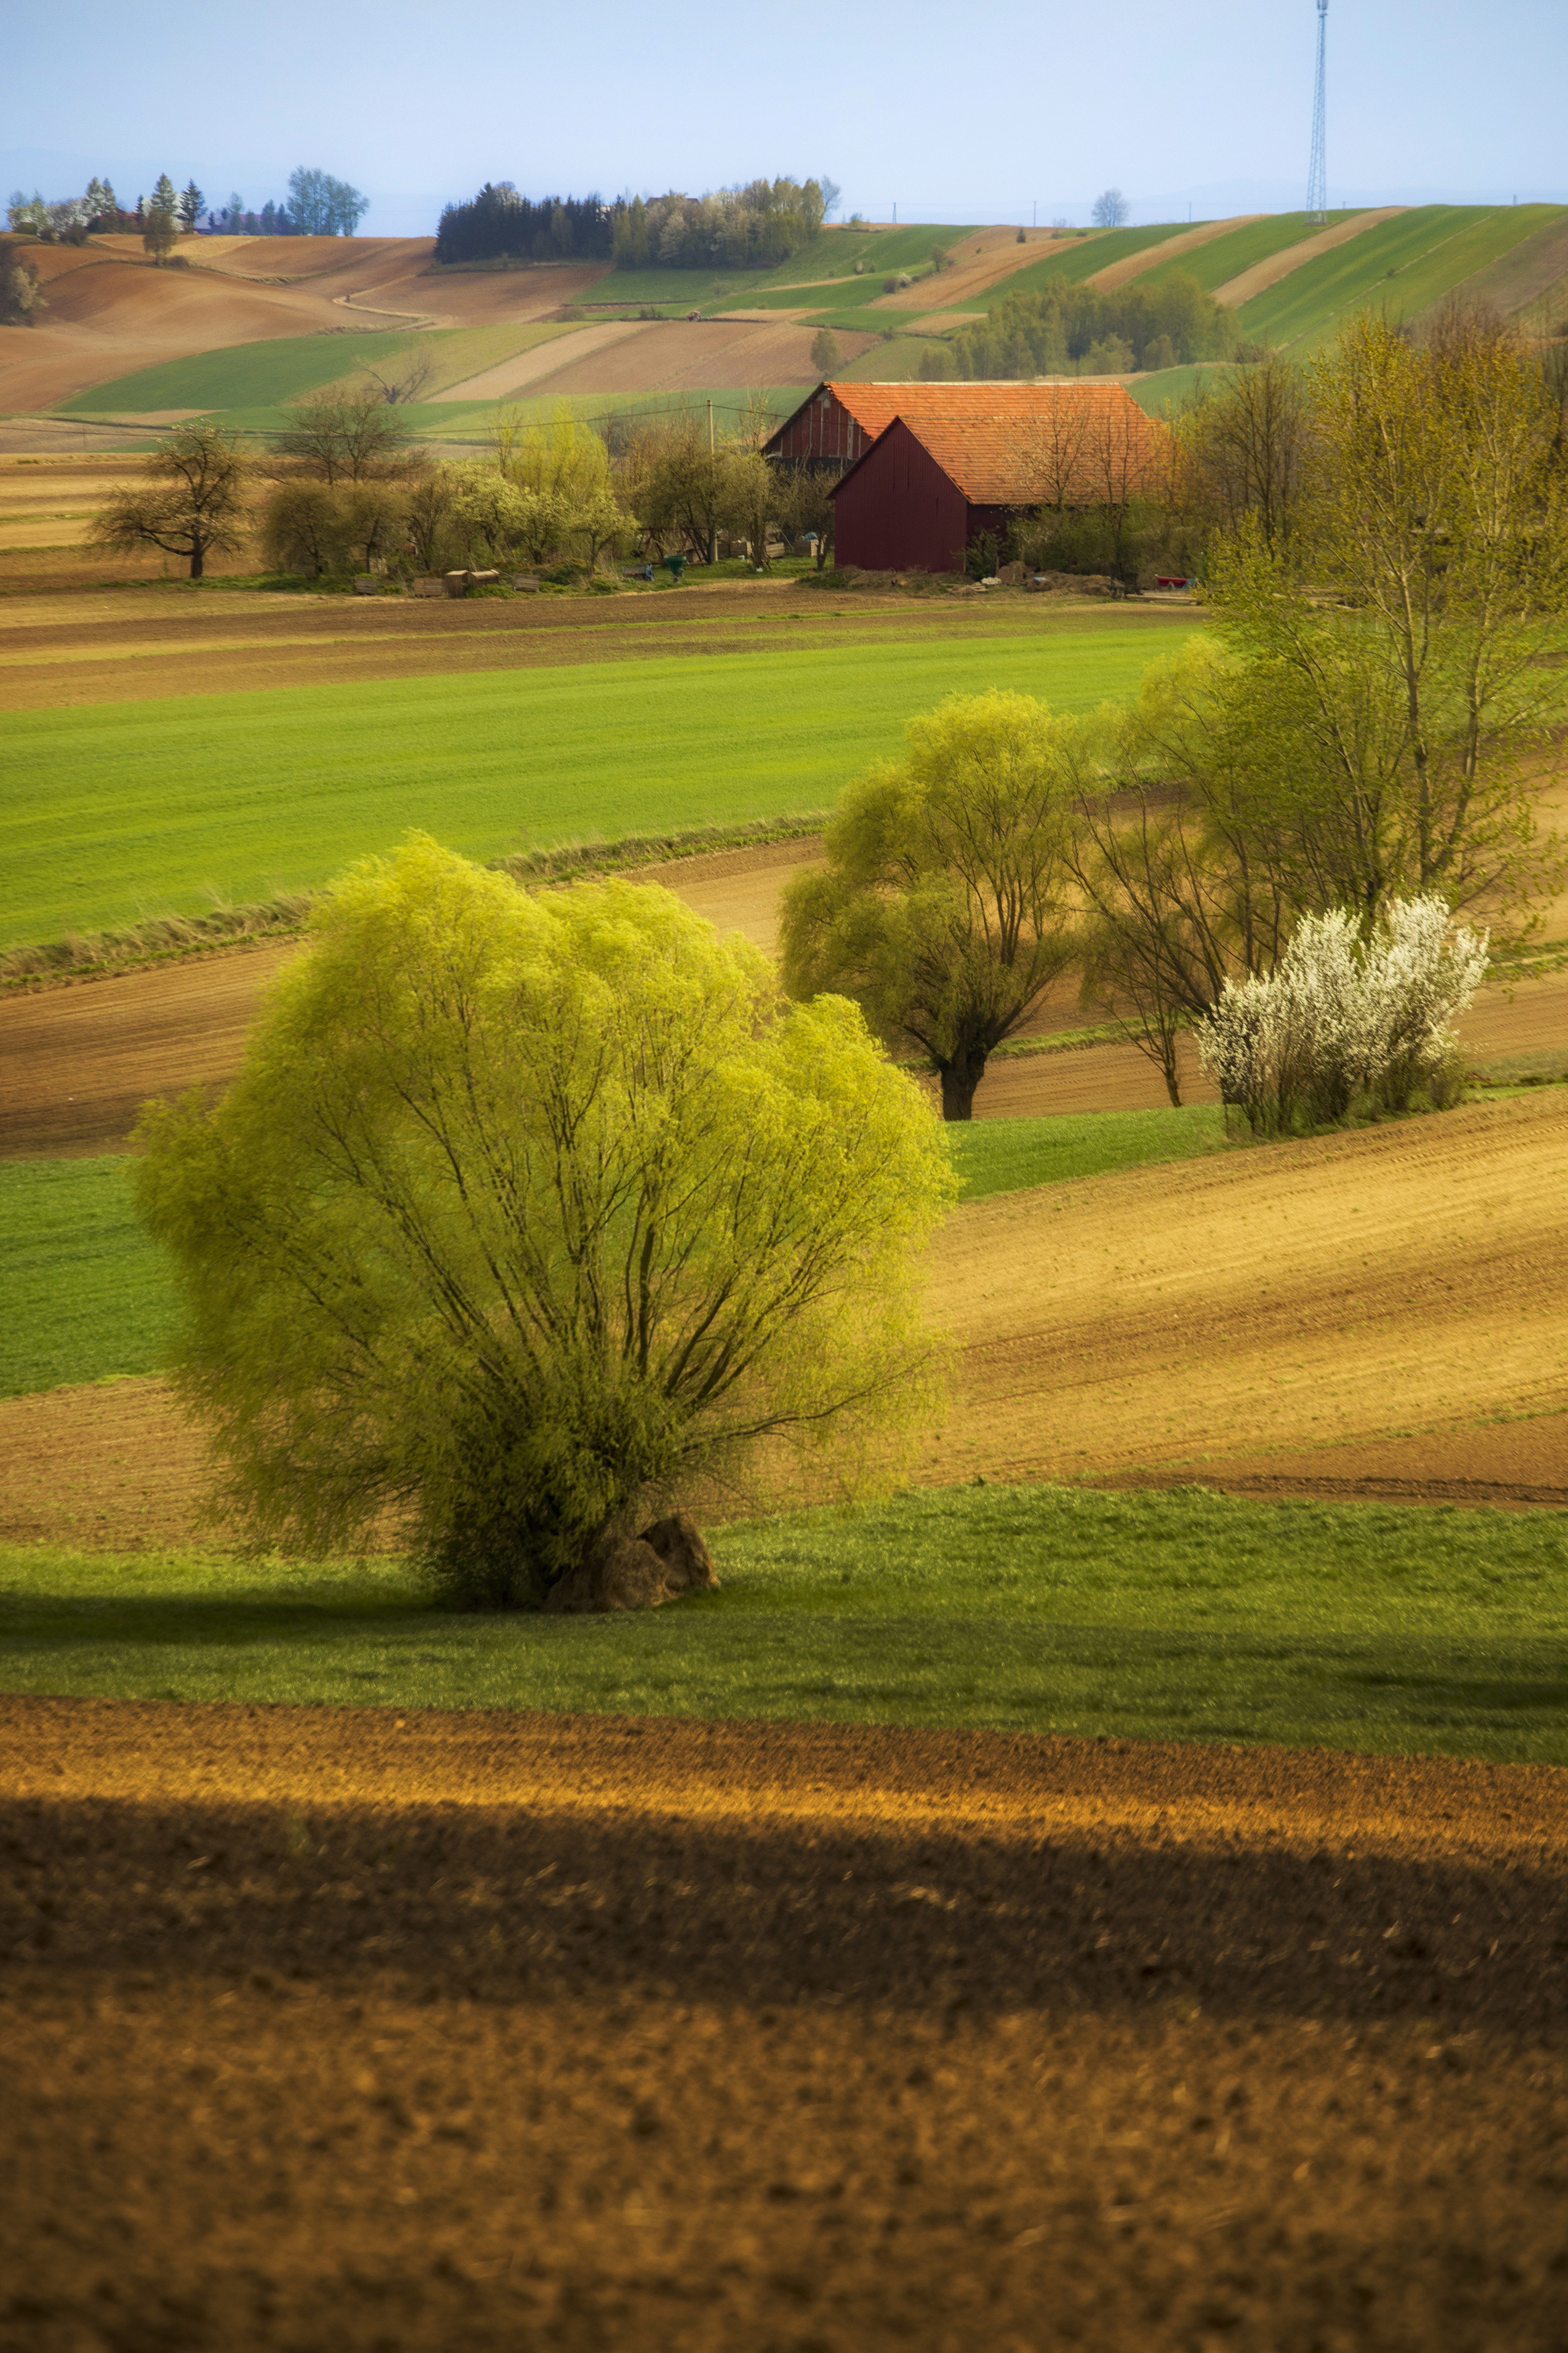 Rural, Agricultural, Field ,Tree, Nature, Agriculture, Farm, Day, Landscape, Willow, Poland, Ponidzie, Damian Cyfka